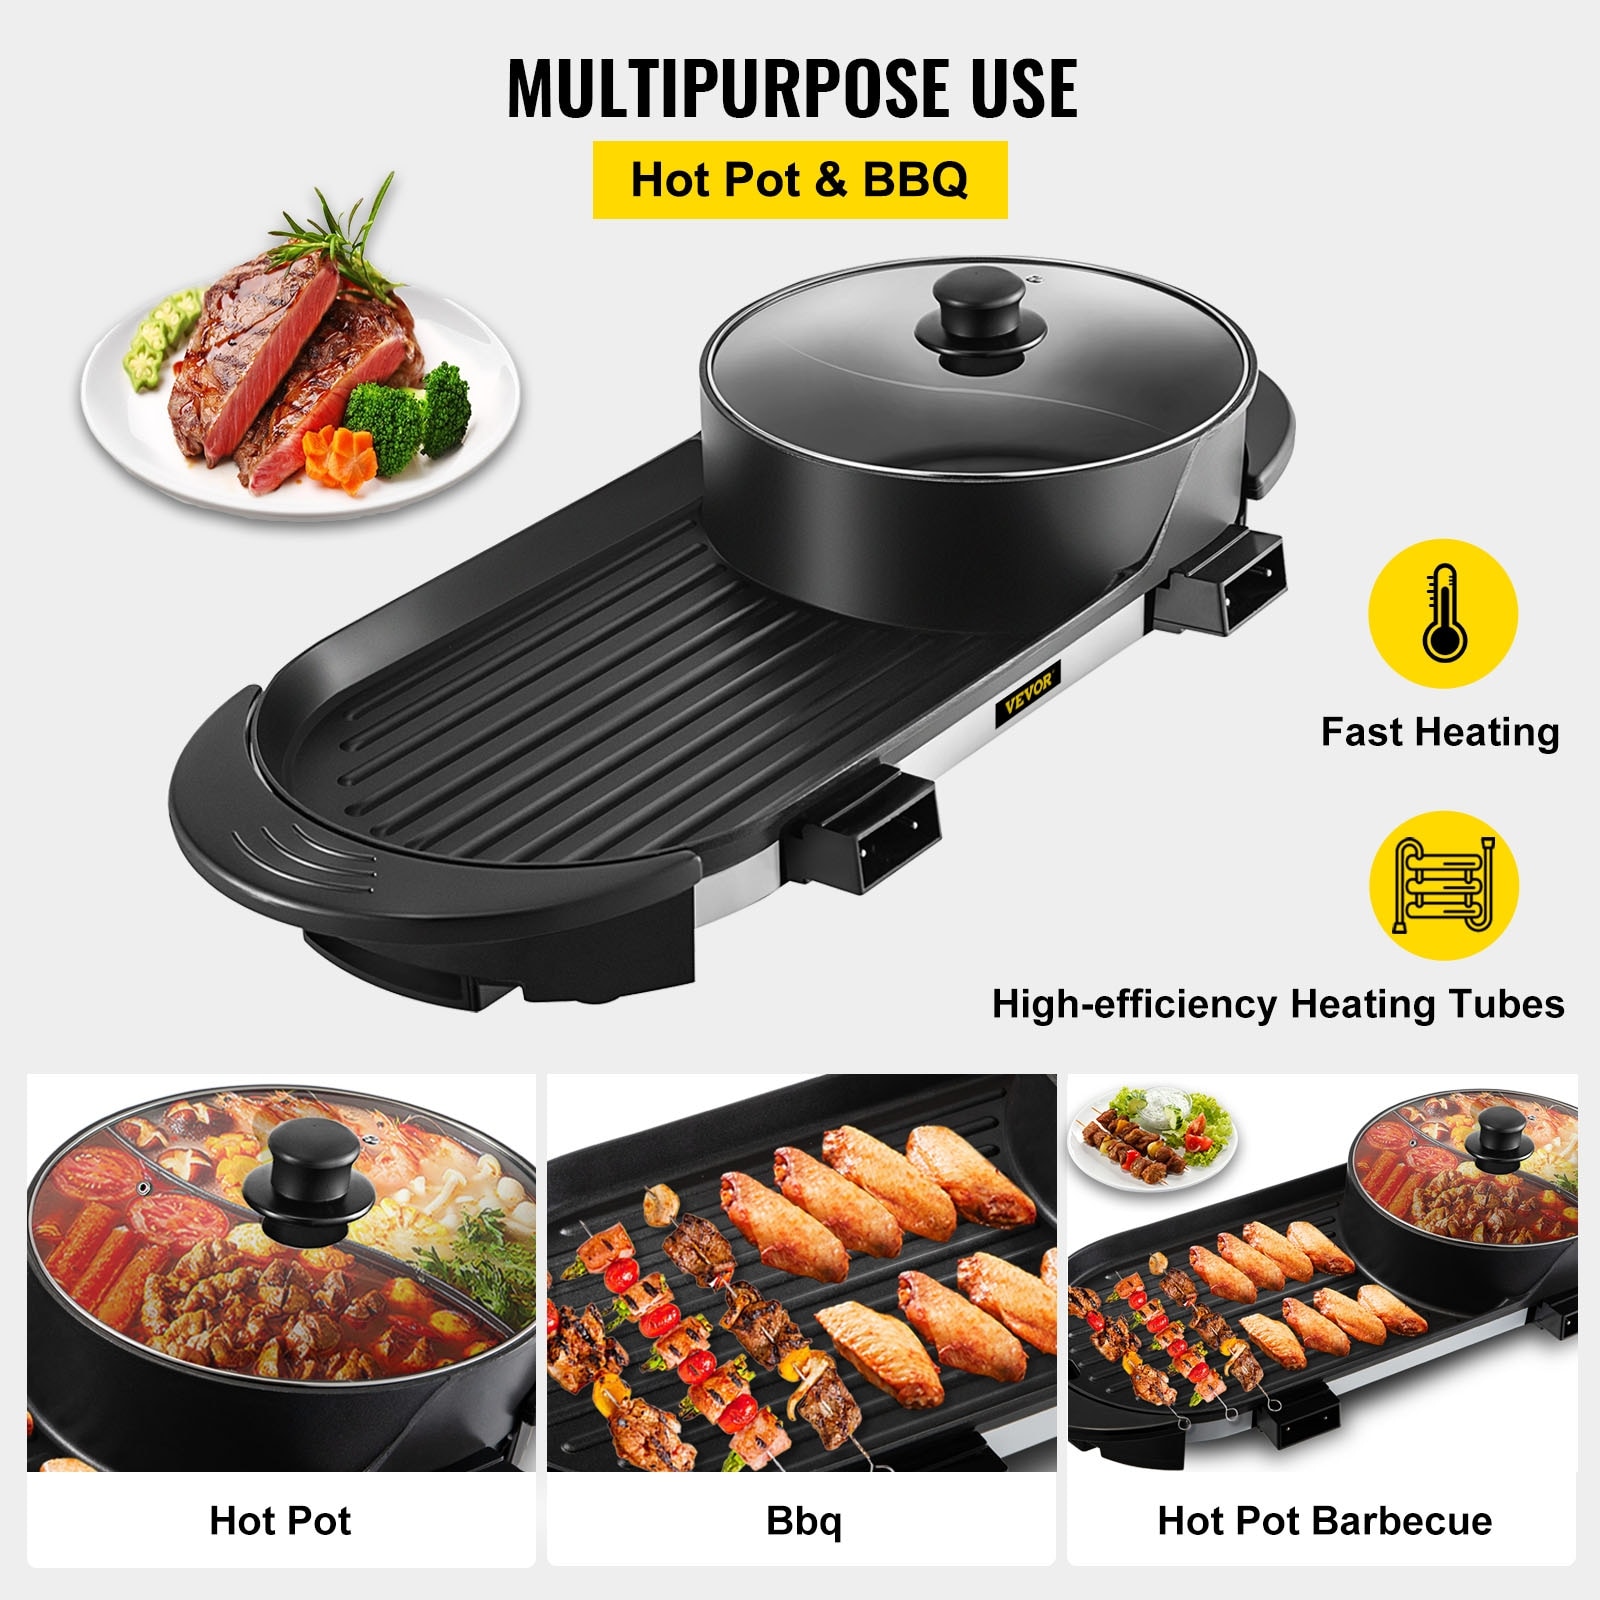 https://ak1.ostkcdn.com/images/products/is/images/direct/37eb5fe9961aae8c395abf0713021c71e87354df/VEVOR-2-in-1-Electric-Grill-and-Hot-Pot-BBQ-Pan-Grill-and-Hot-Pot-Multifunctional-Teppanyaki-Grill-Pot-with-Dual-Temp-Control.jpg